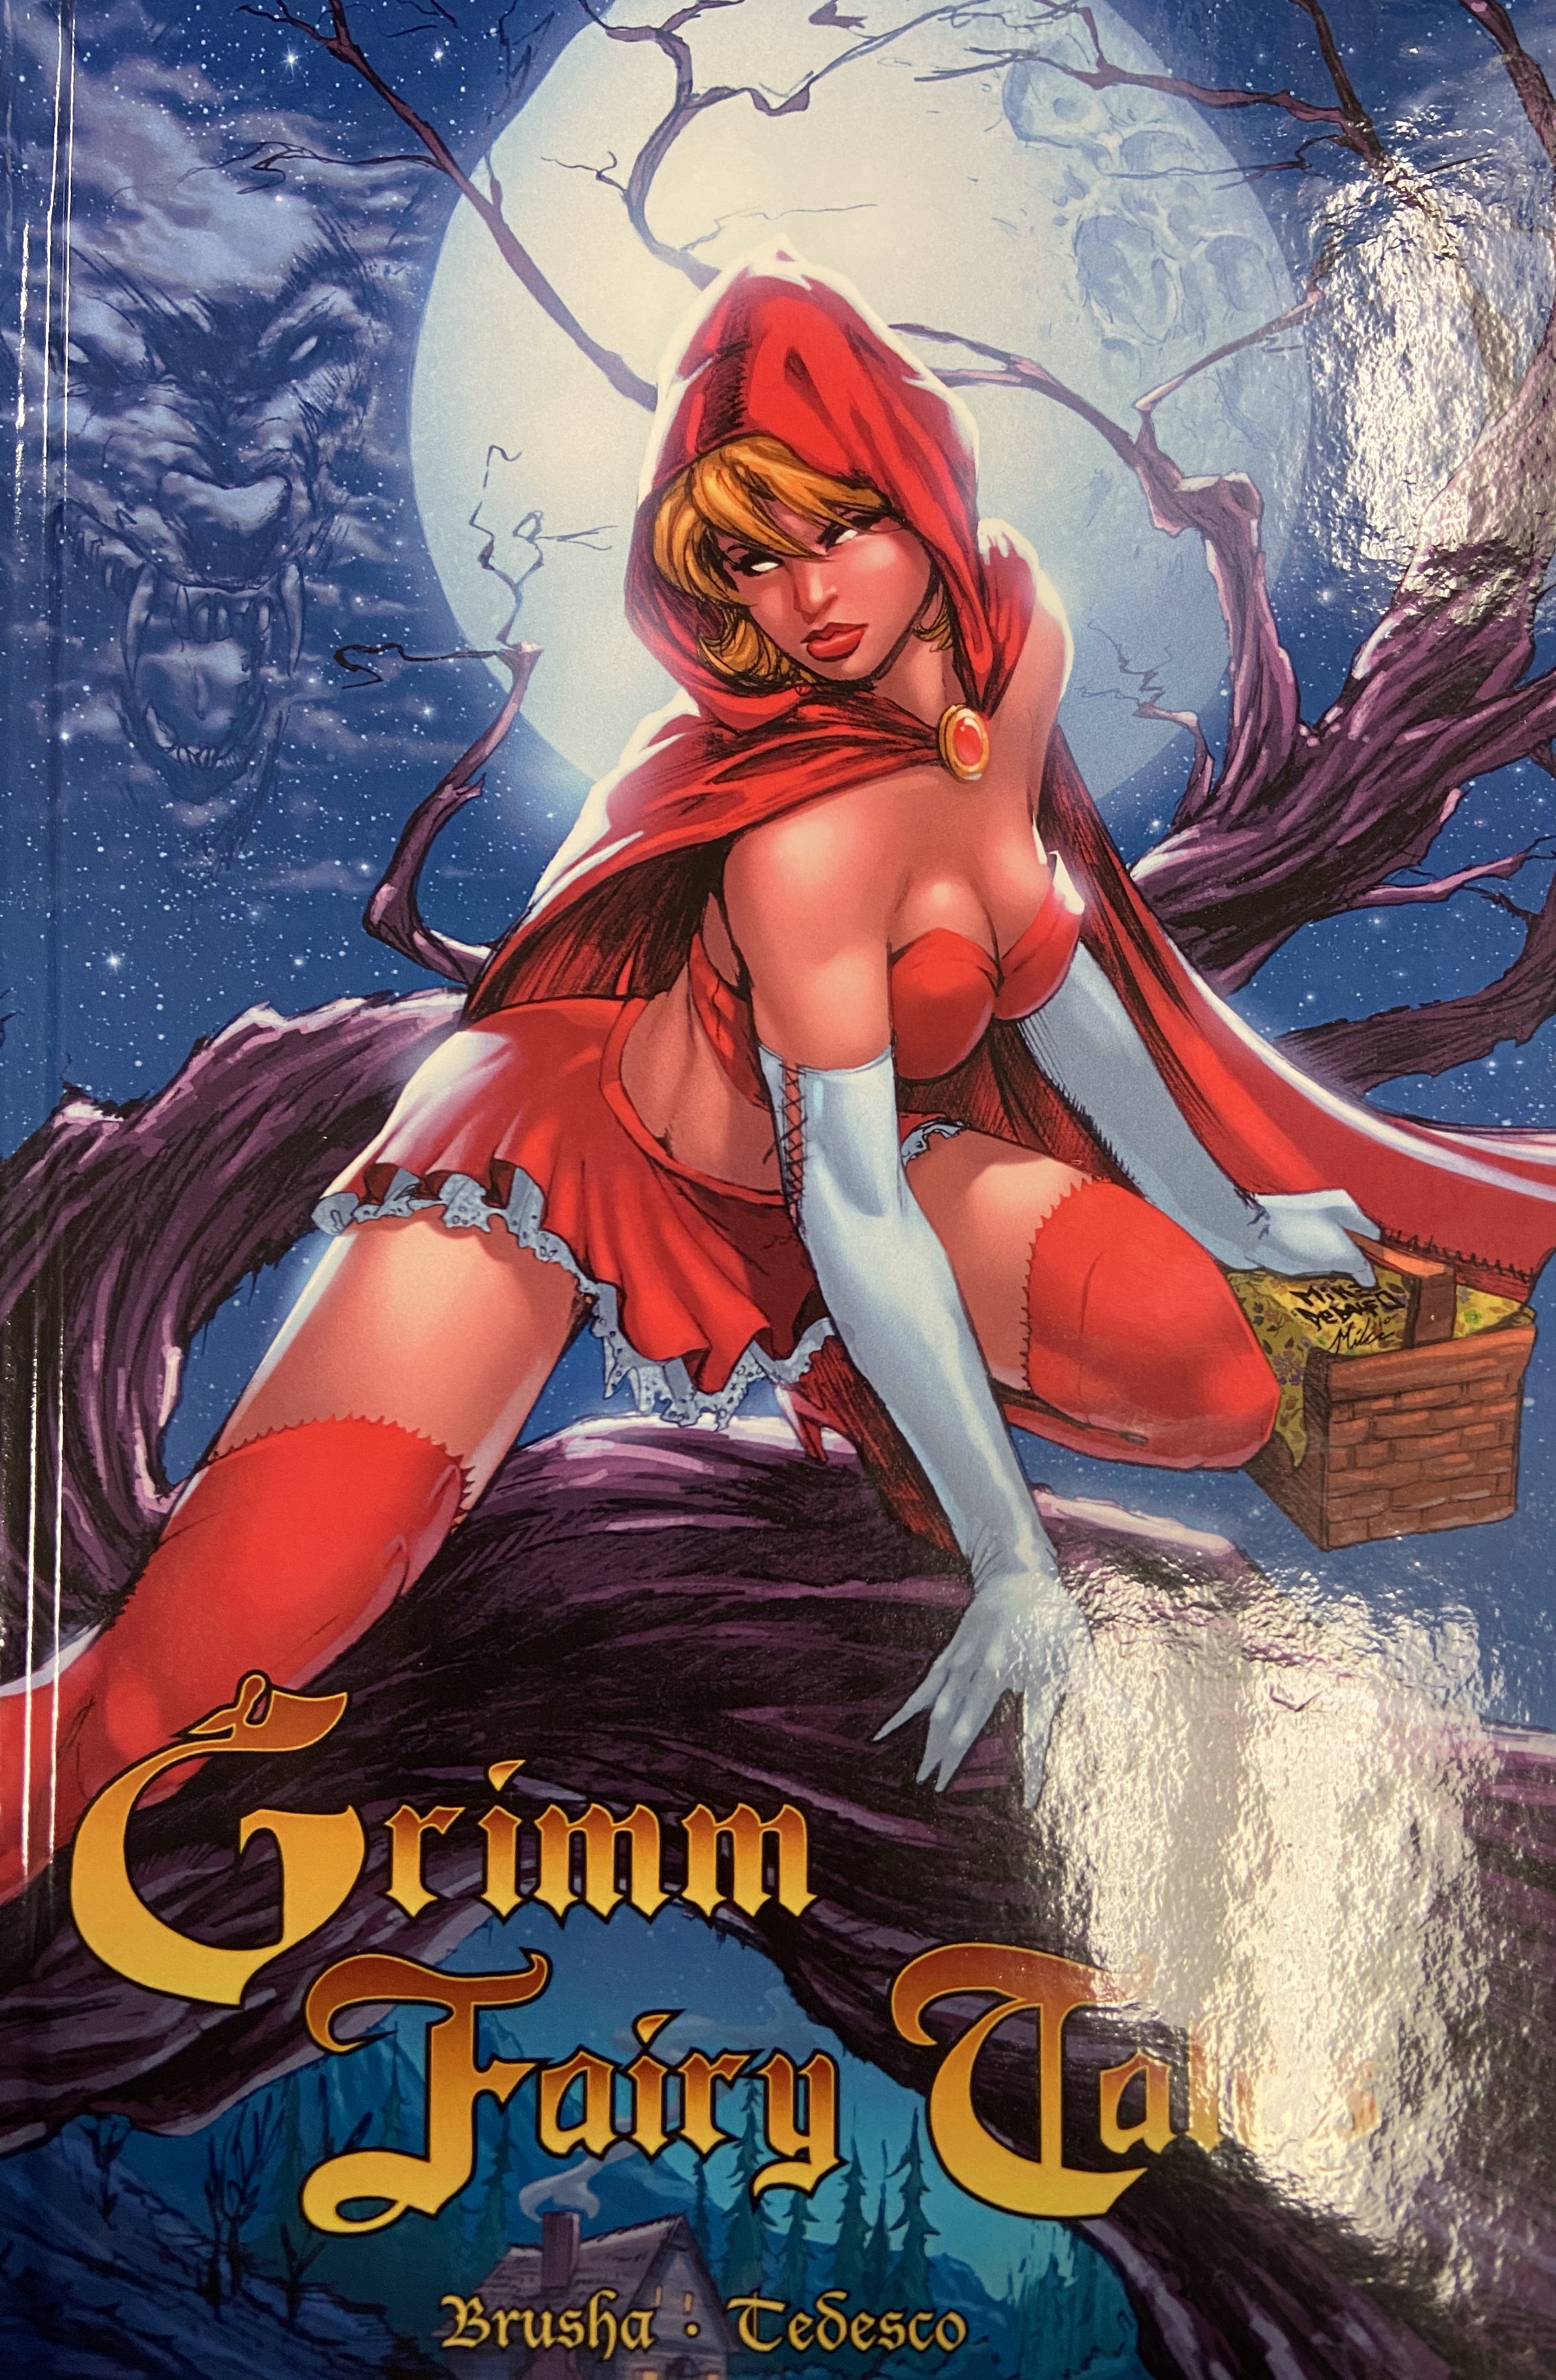 Image of Grimm Fairy Tales Vol. 1 Special Edition Graphic Novel Hardcover - LE 500